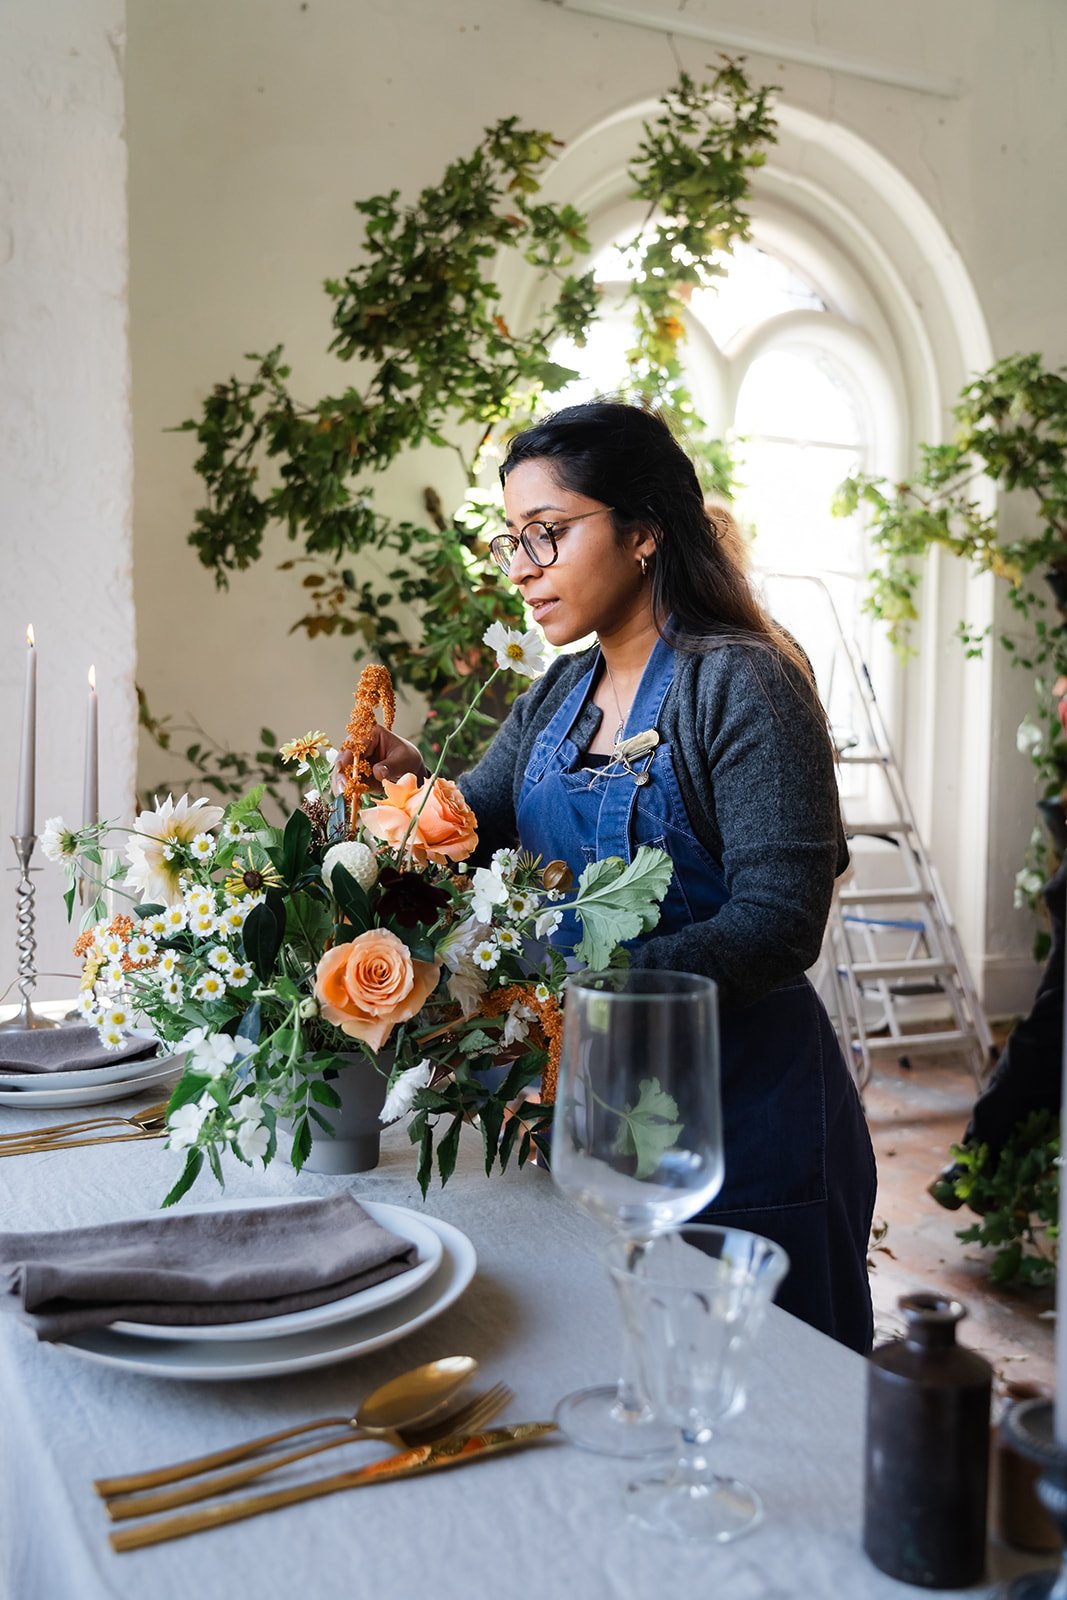 The wedding flowers course student setting a floral tablescape